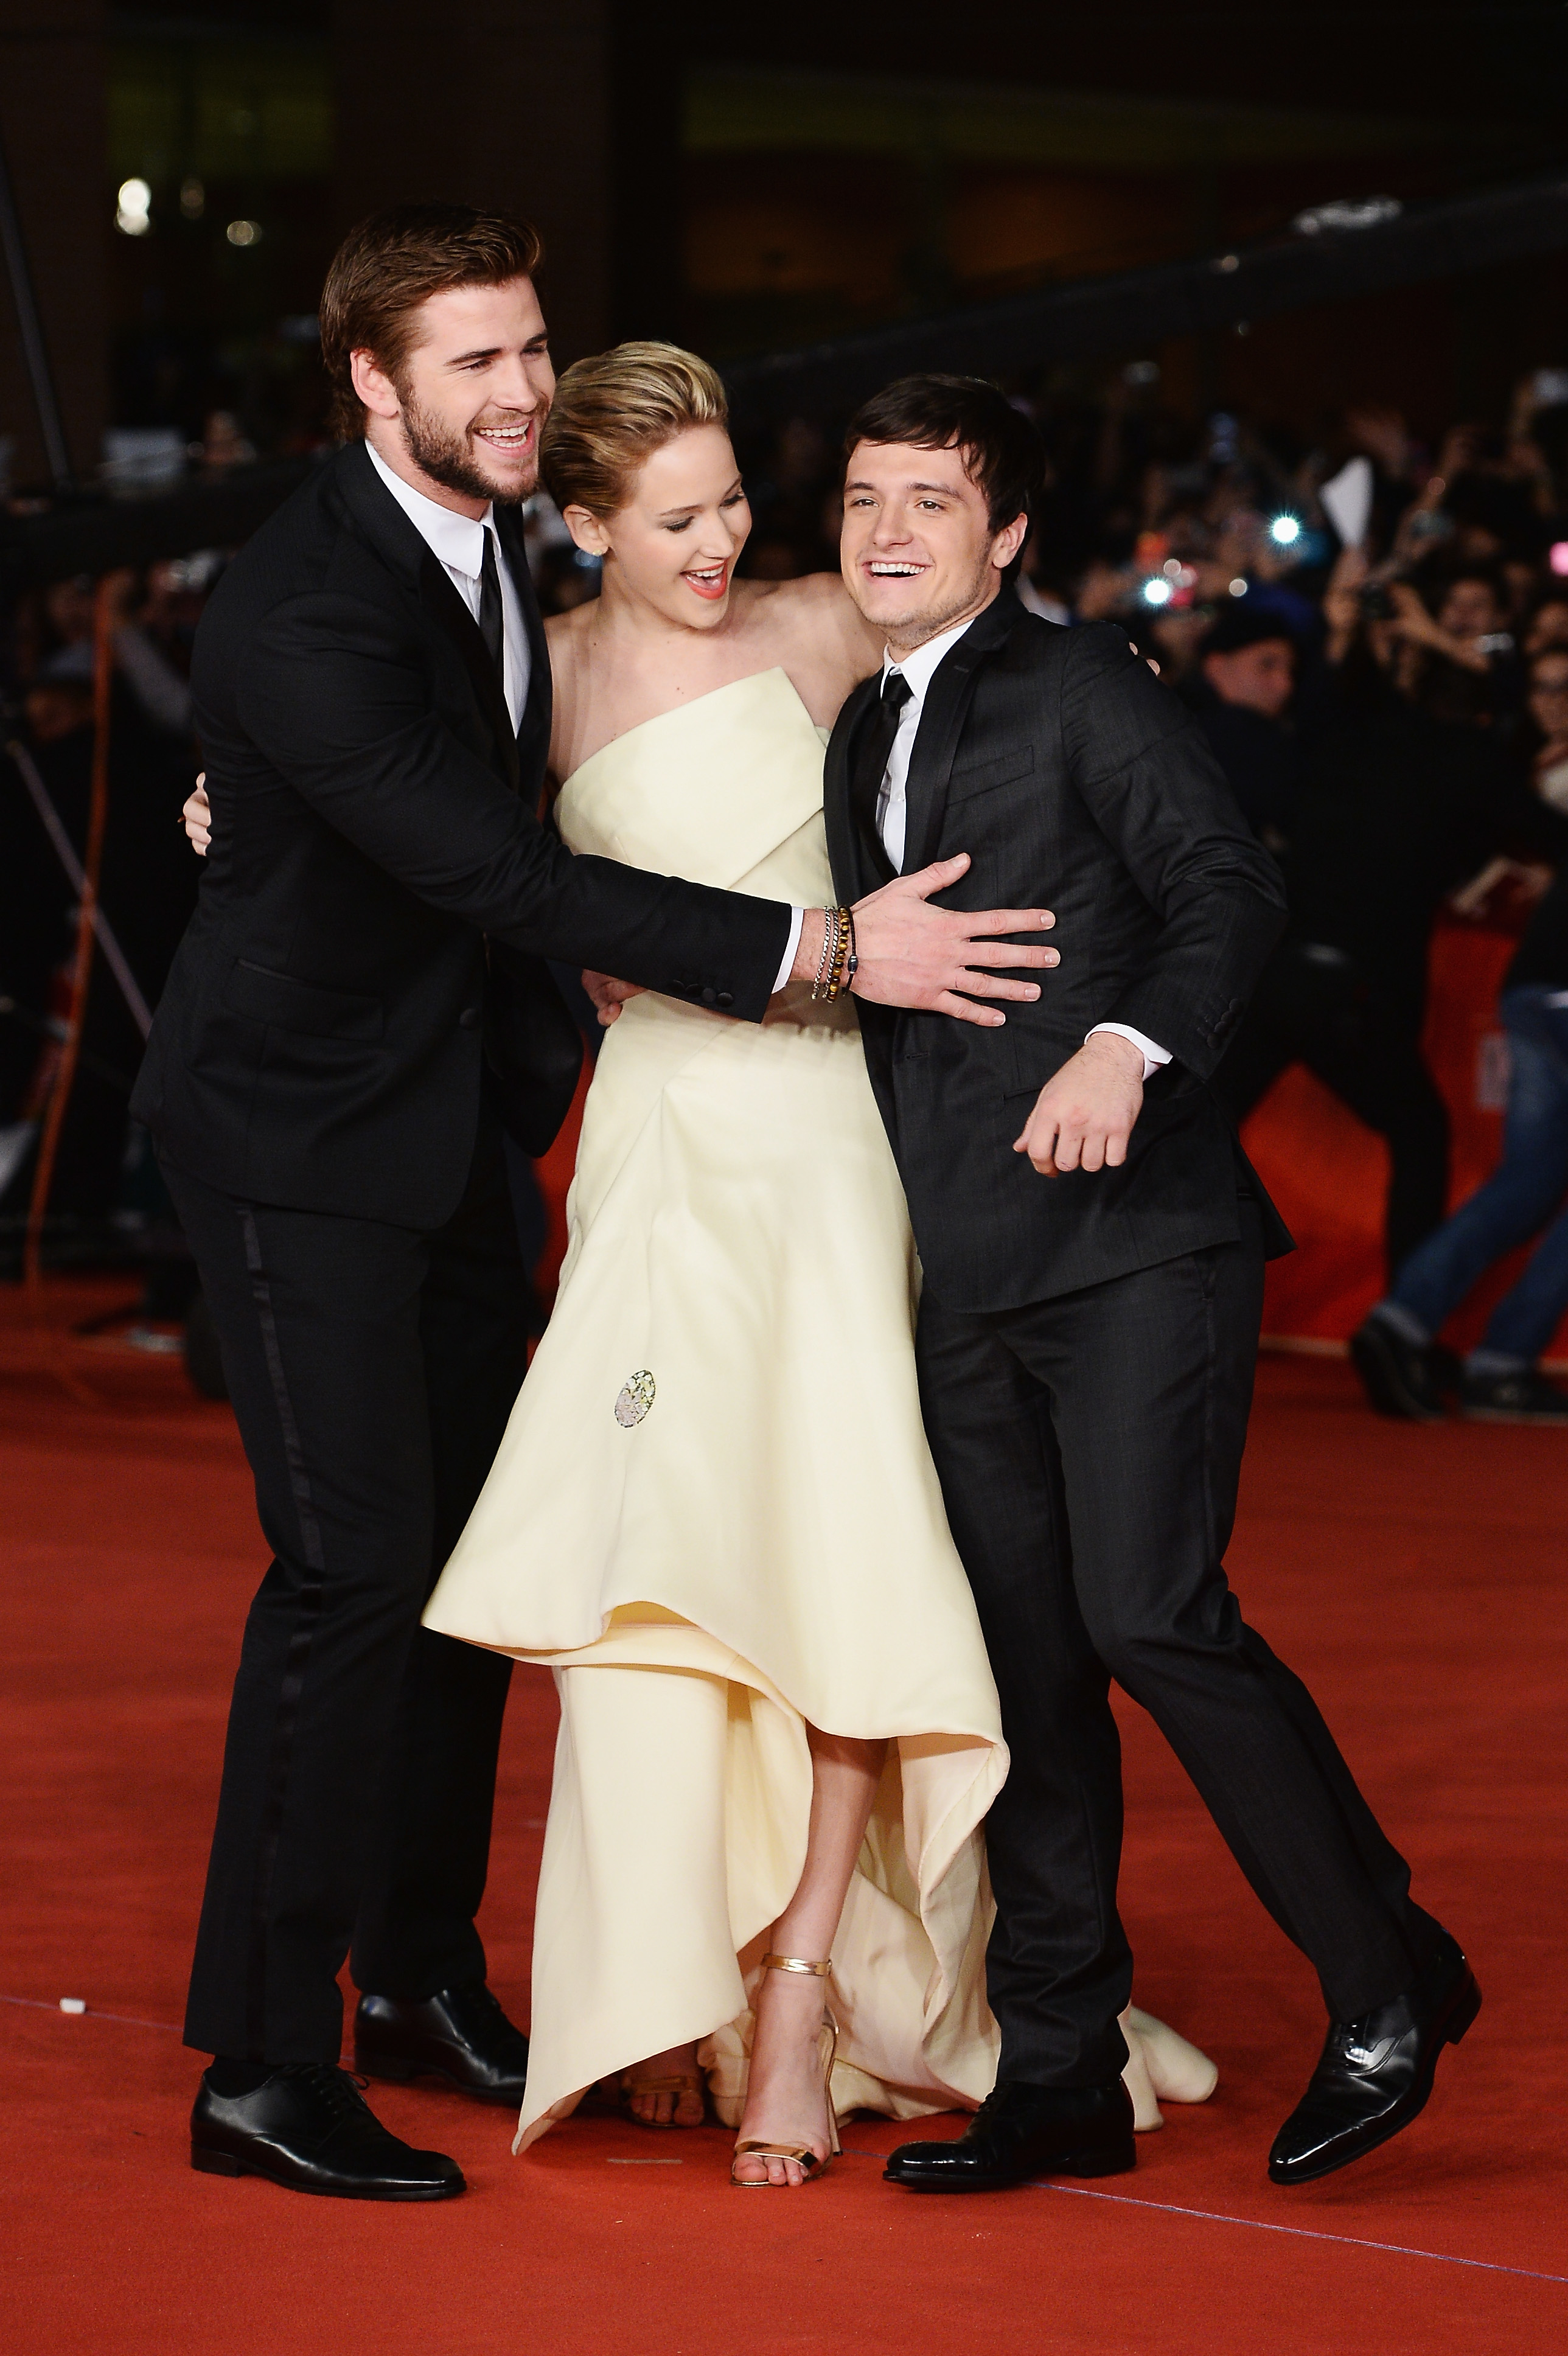 the three laughing on the red carpet